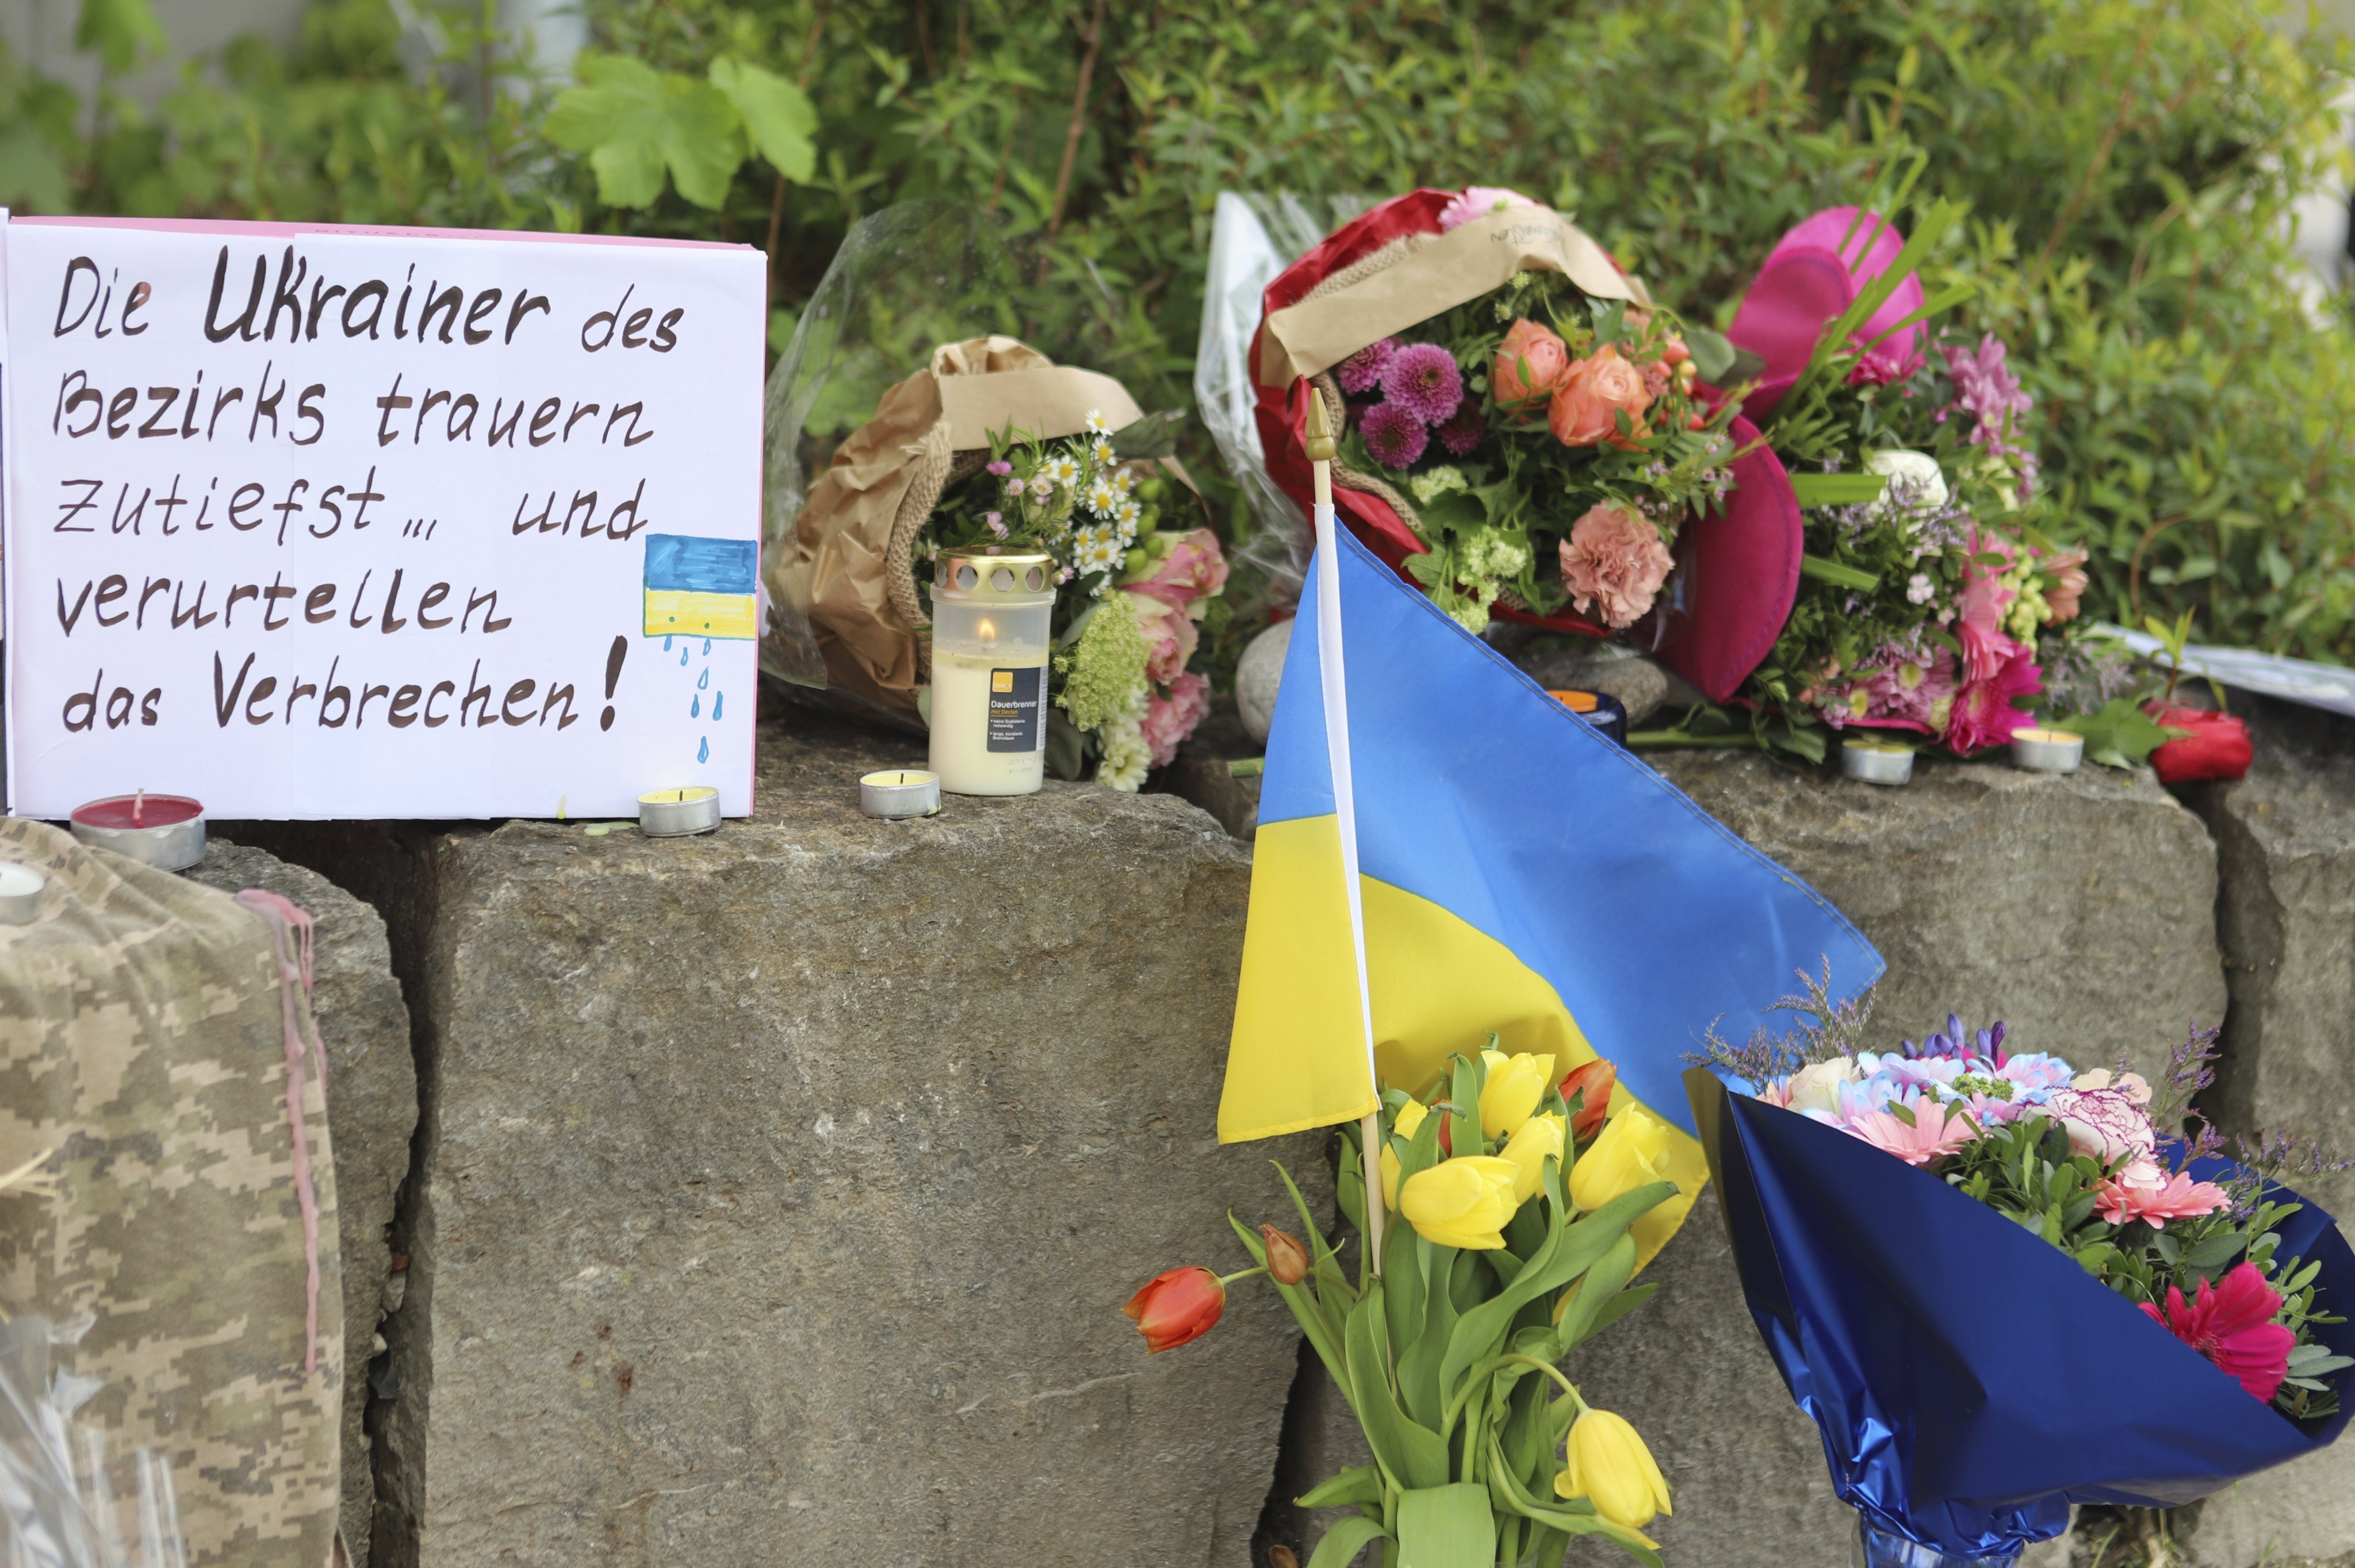 Flowers and a Ukrainian flag are laid at a shopping centre in Murnau, Germany on Sunday after two Ukrainian men were stabbed to death. A Russian suspect was arrested, German media reported. Photo: dpa via AP